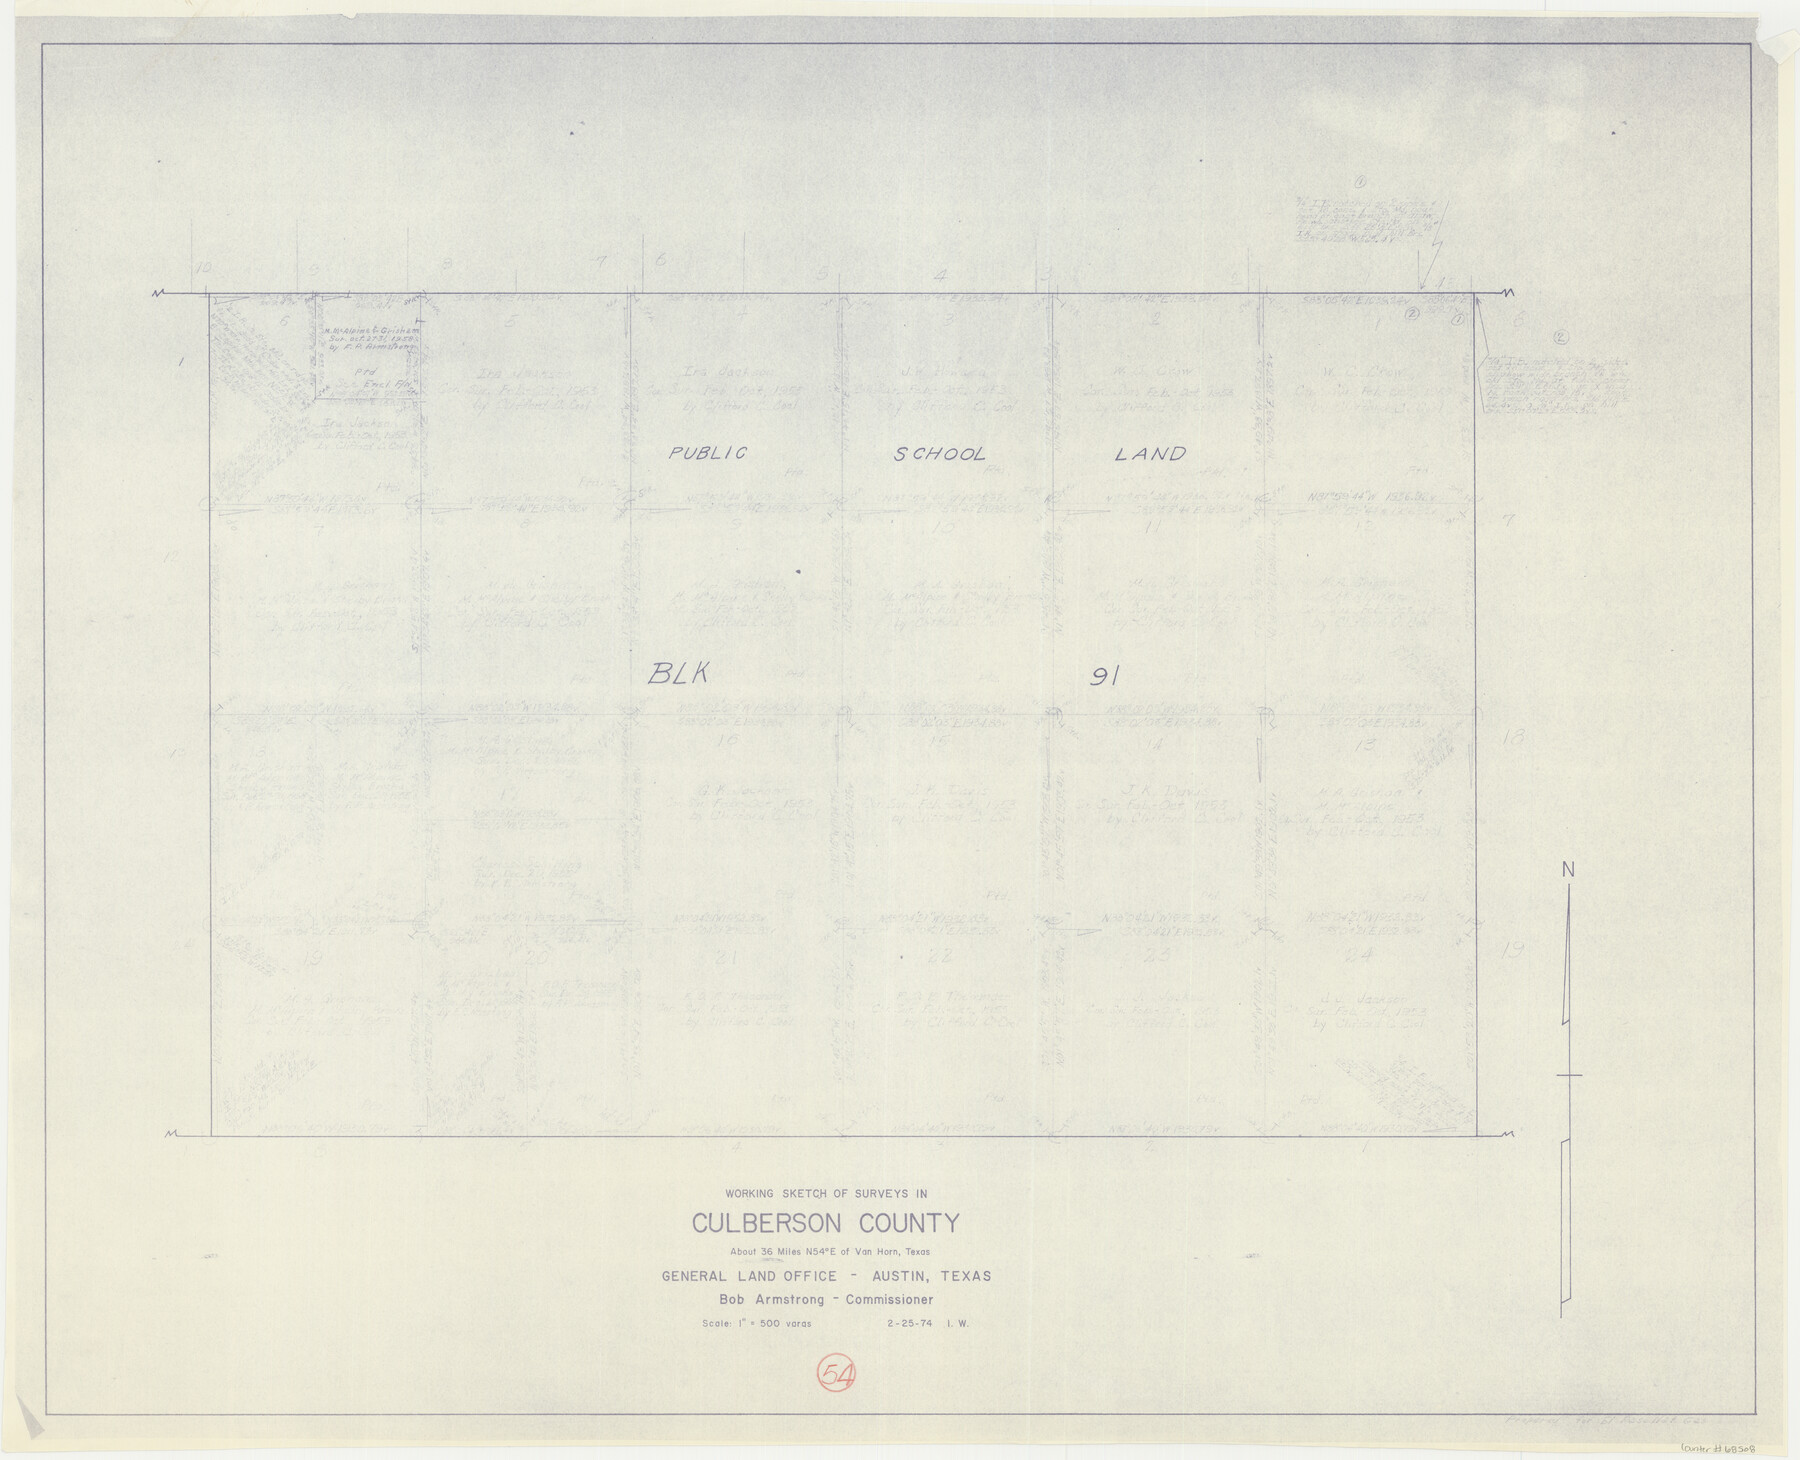 68508, Culberson County Working Sketch 54, General Map Collection